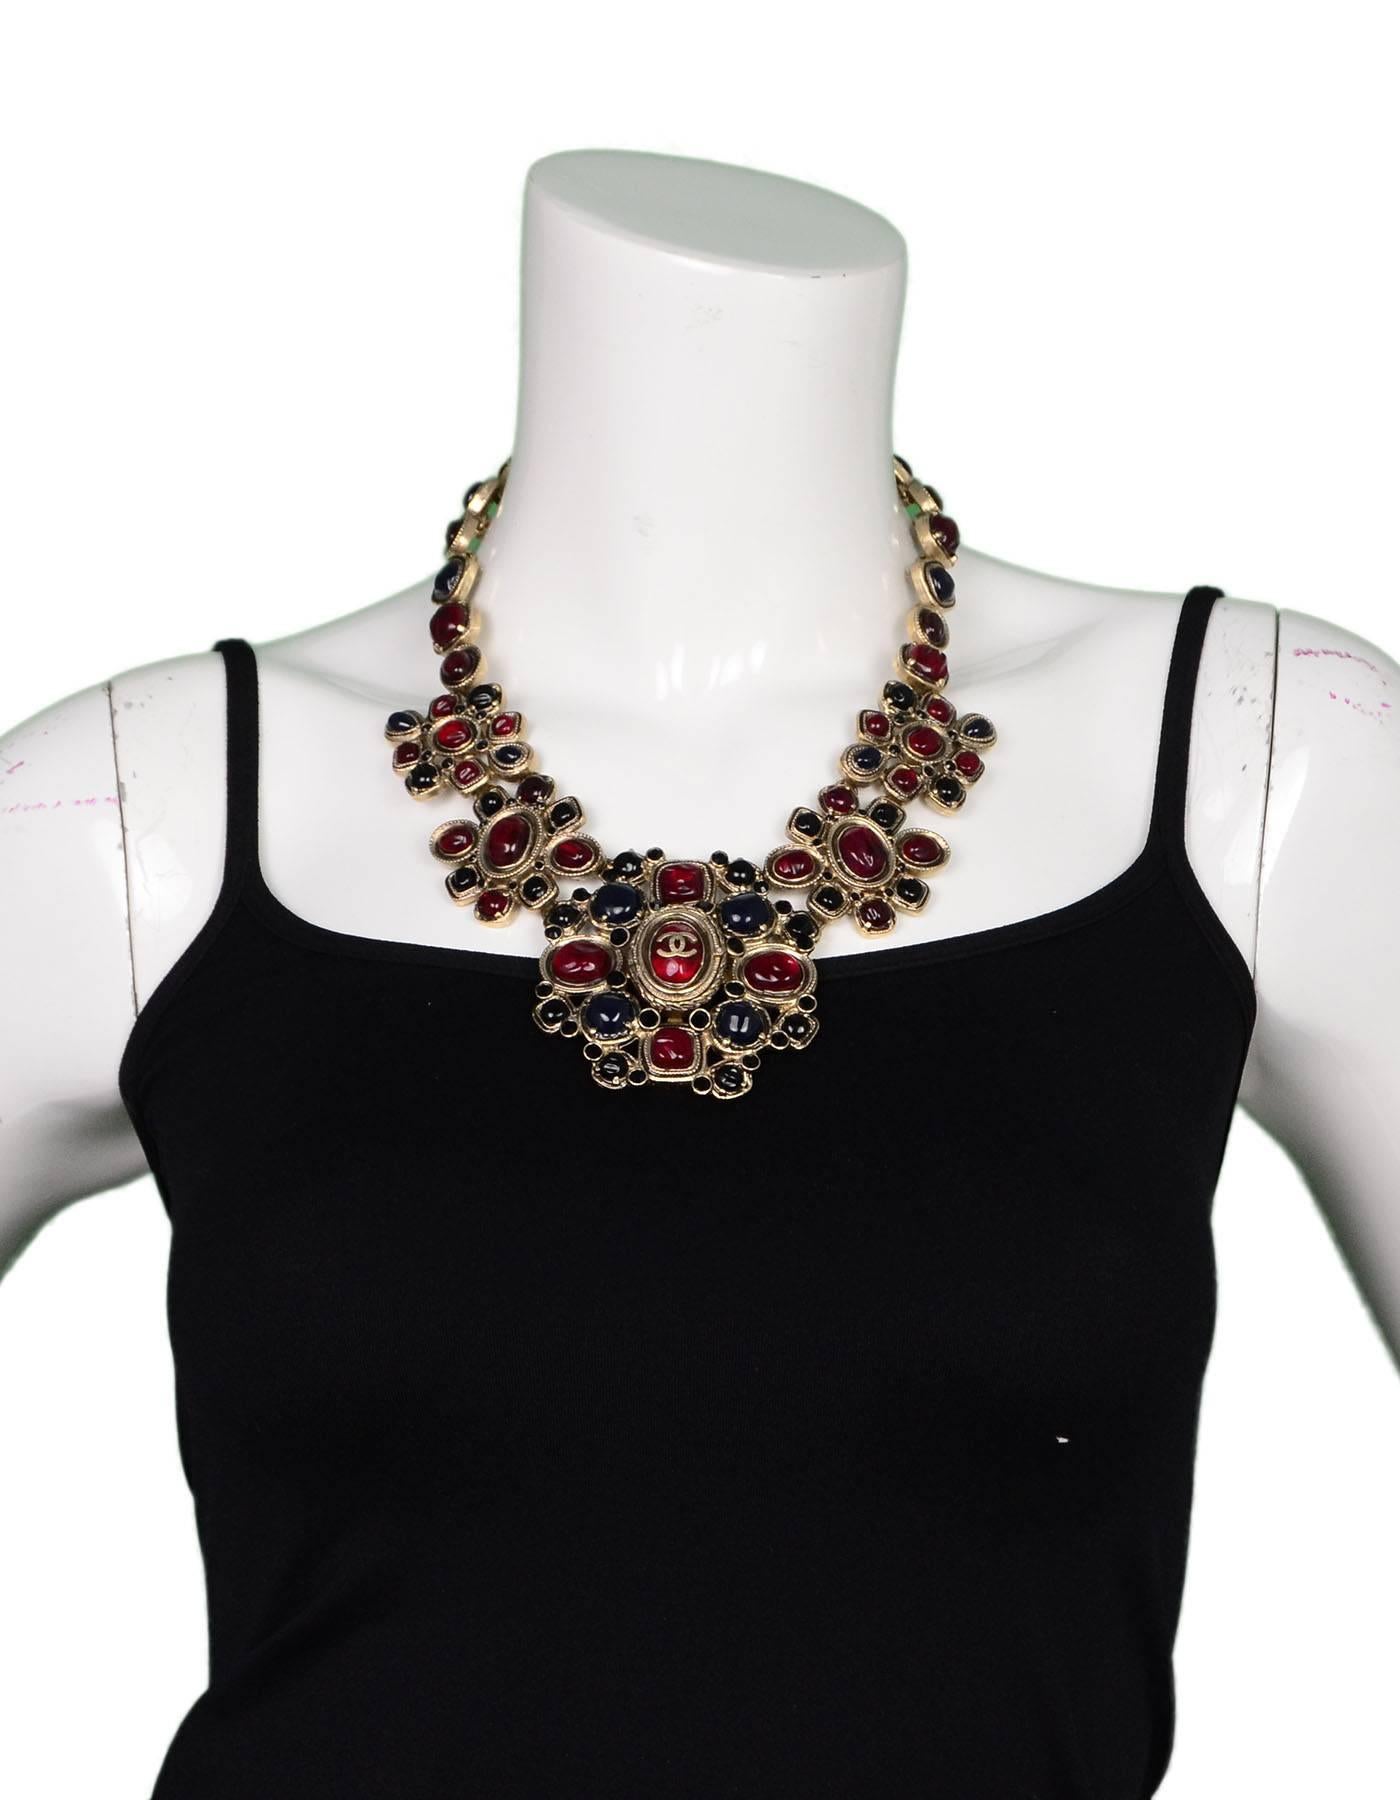 Chanel '10 Resort Runway Burgundy & Navy Bib Necklace In Excellent Condition In New York, NY